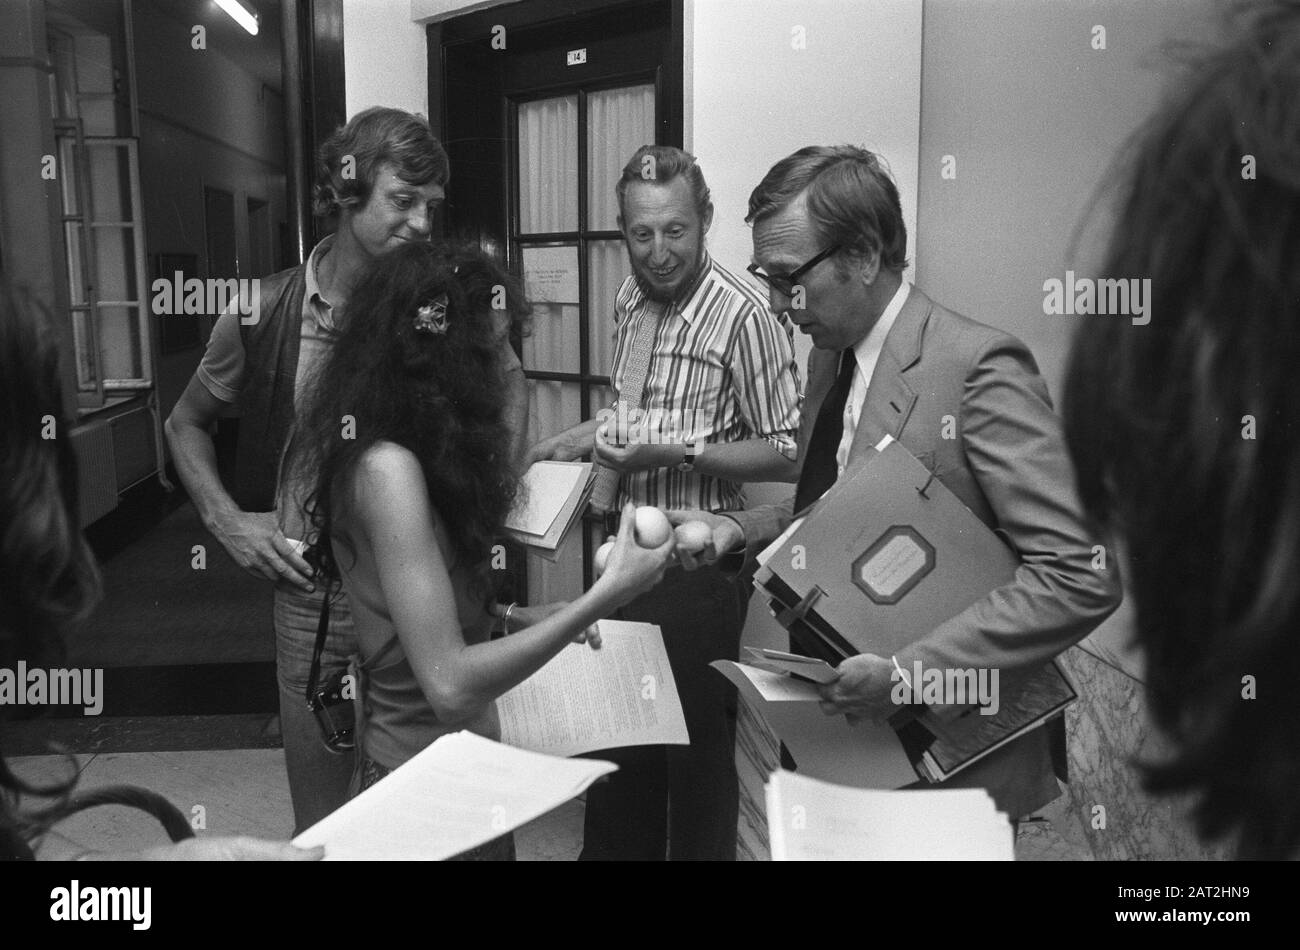 City Council Amsterdam, members action committee Ruigoord offer Alderman Brautigam apples to Date: August 15, 1973 Location: Amsterdam, Noord-Holland Keywords: City Councils Stock Photo